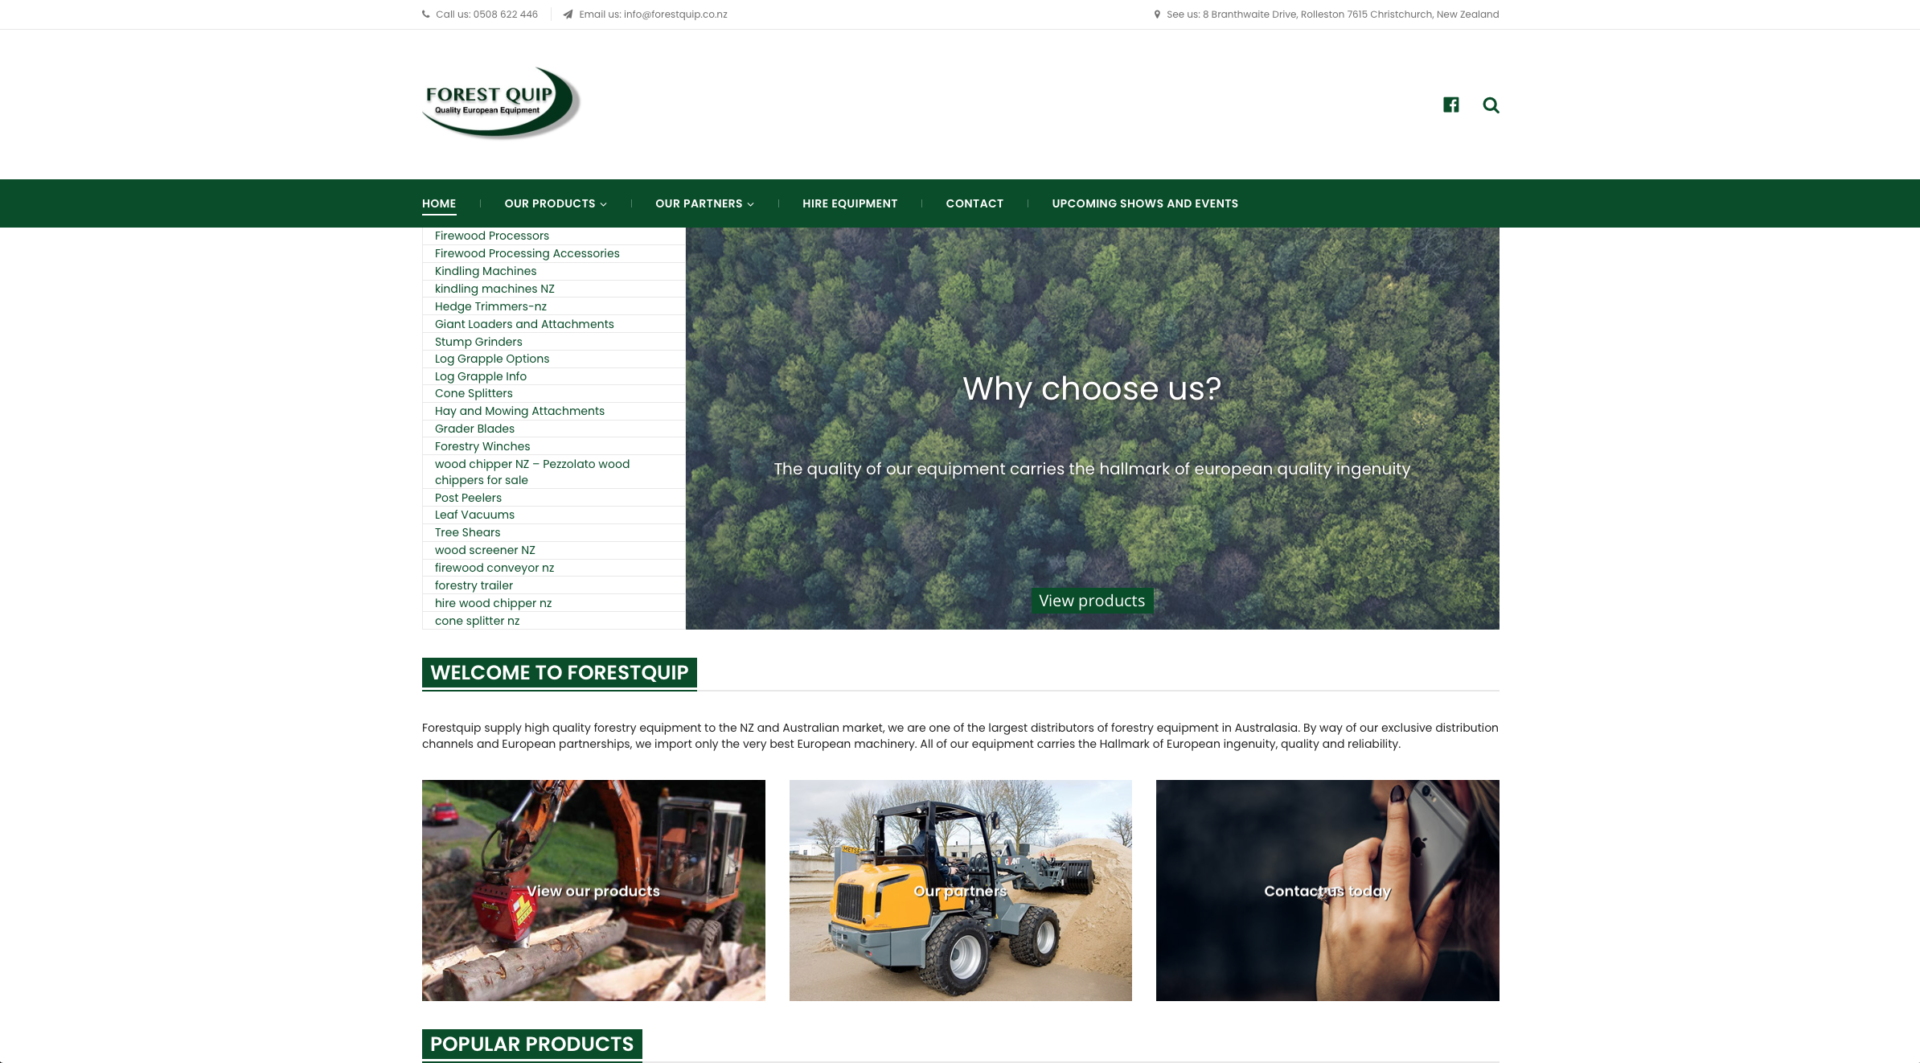 ForestQuip (Forest Equipment) New Zealand - website design and development with forestry green colours symbolizing dense bush. A business based in Rolleston, Canterbury. This is WordPress website design trying to be more personable and friendly to avoid the massive lists of equipment for sale on this ecomm site